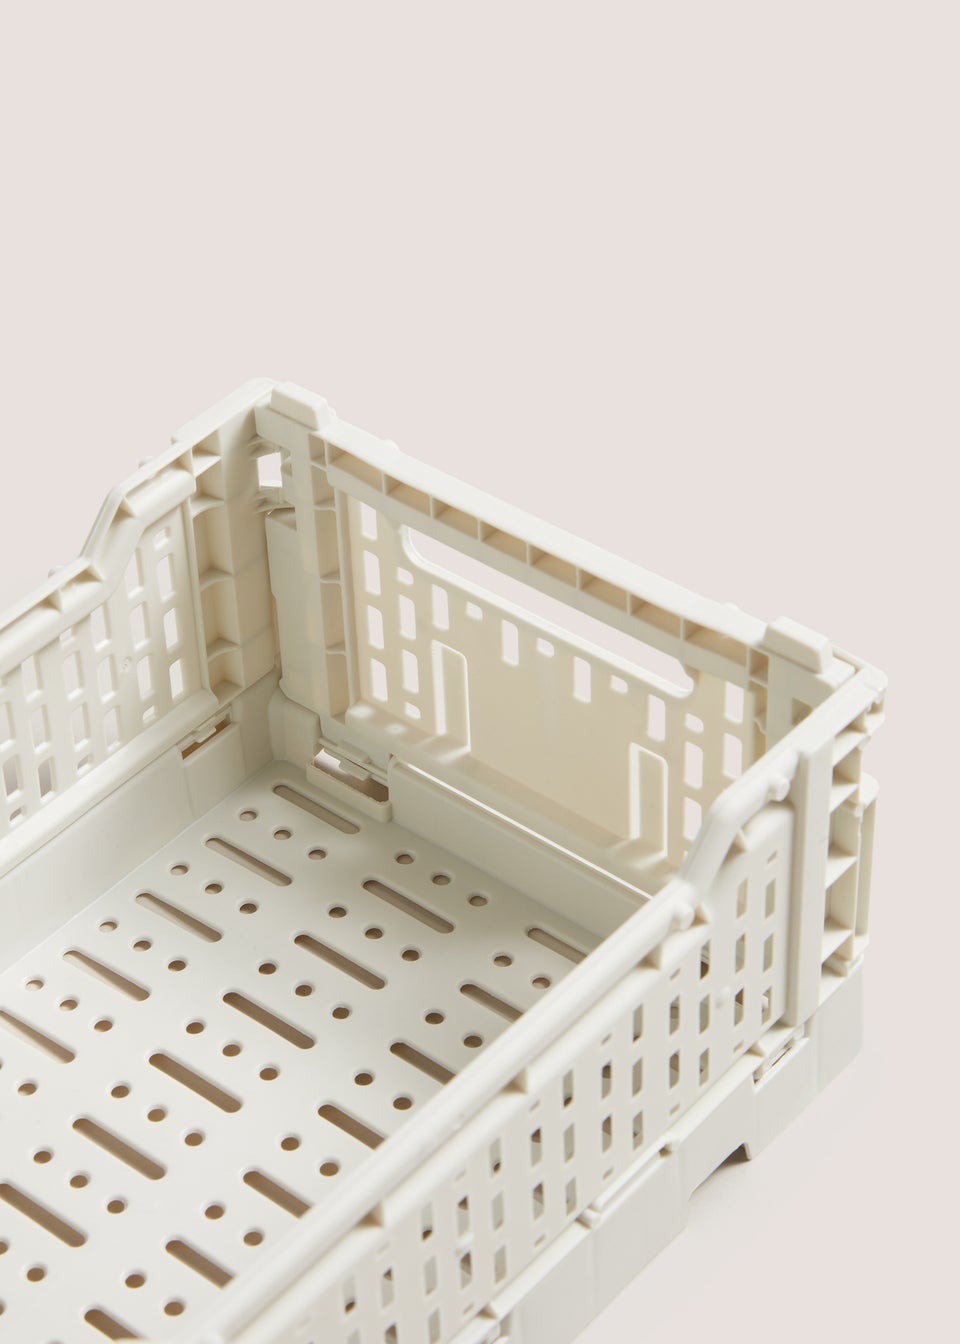 Grey Collapsible Crate (270mm x 170mm x 105mm)